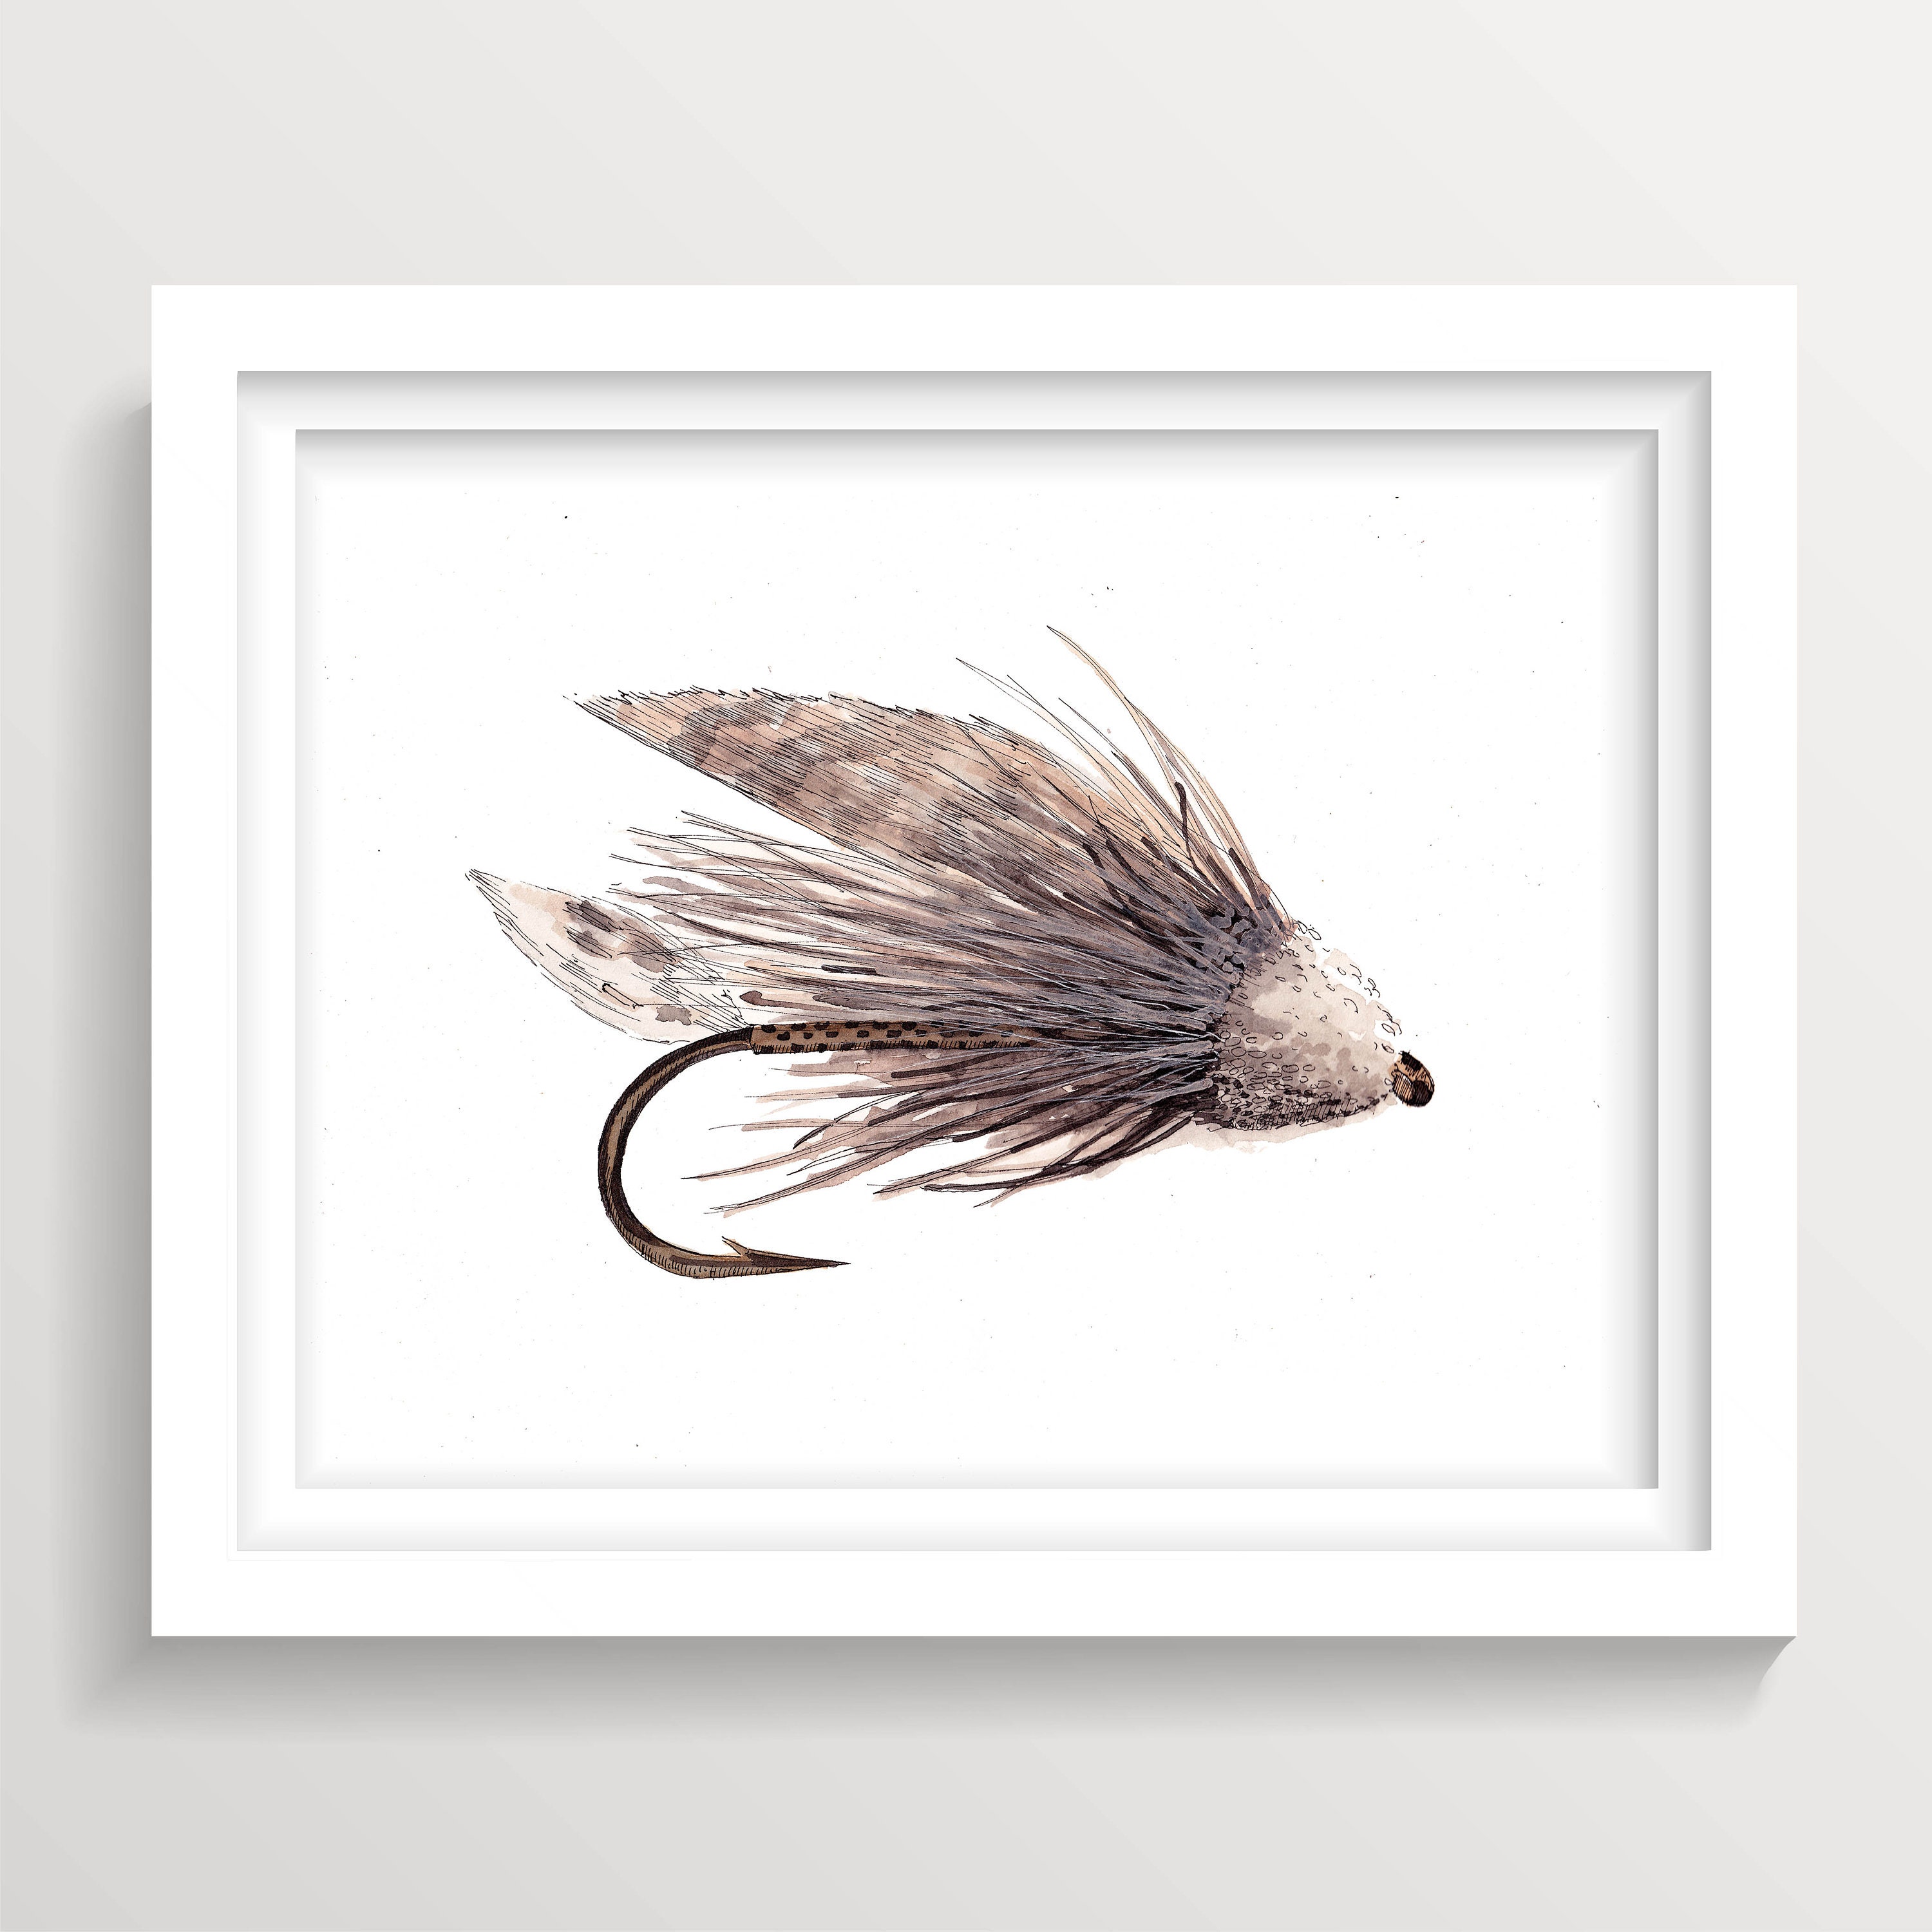 MUDDLER MINNOW FLY - Fly Fishing, Lure, Bait, Freshwater, Ink and